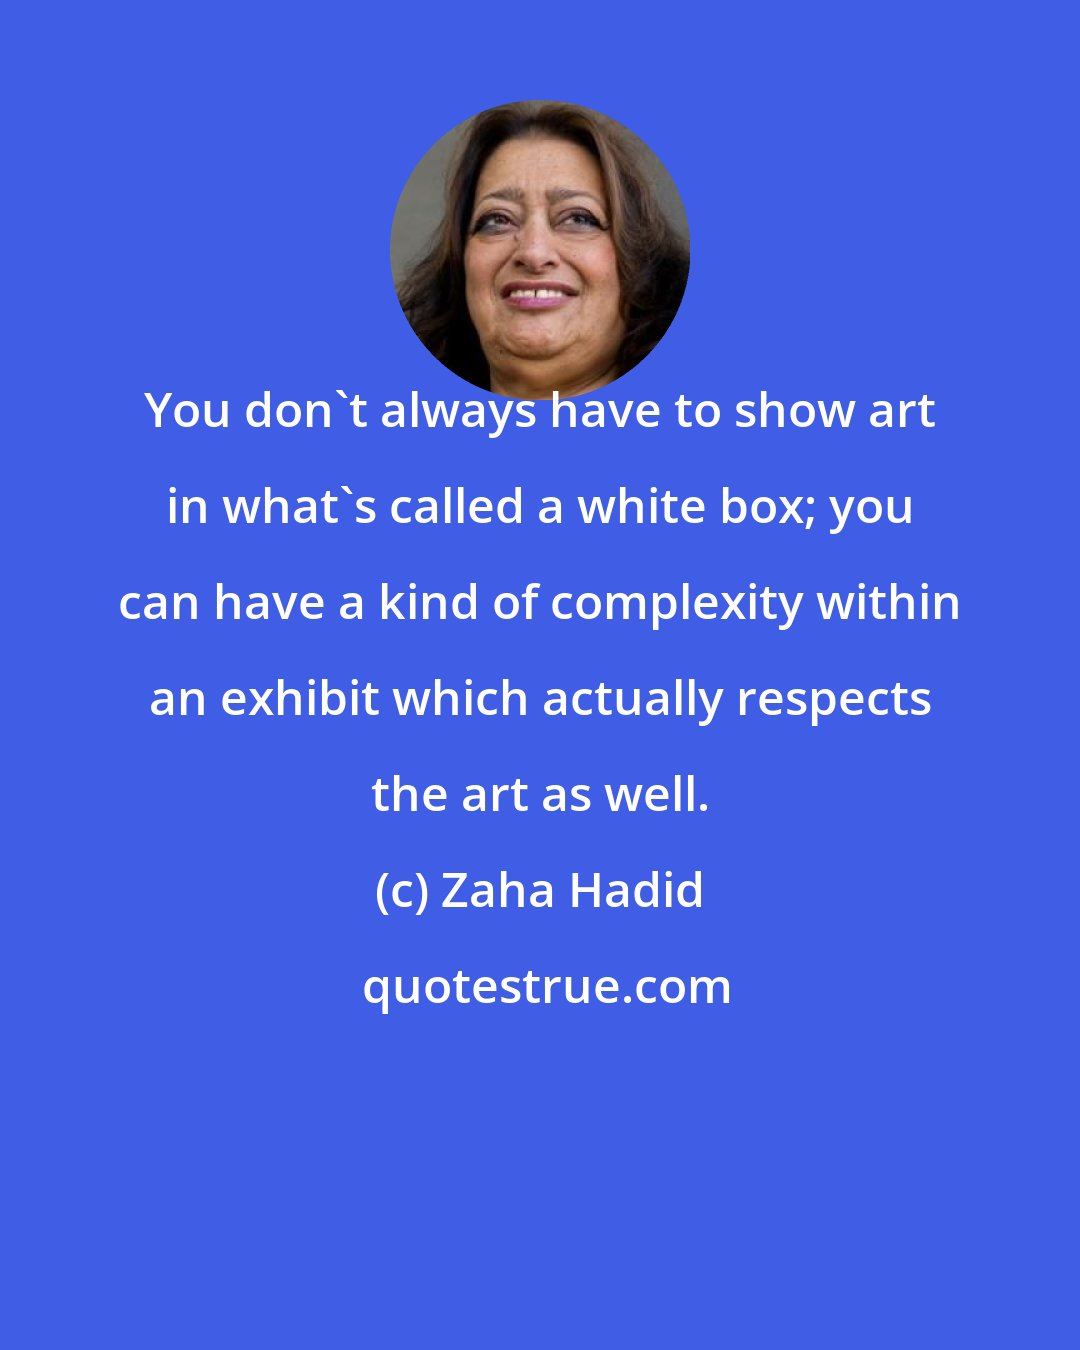 Zaha Hadid: You don't always have to show art in what's called a white box; you can have a kind of complexity within an exhibit which actually respects the art as well.